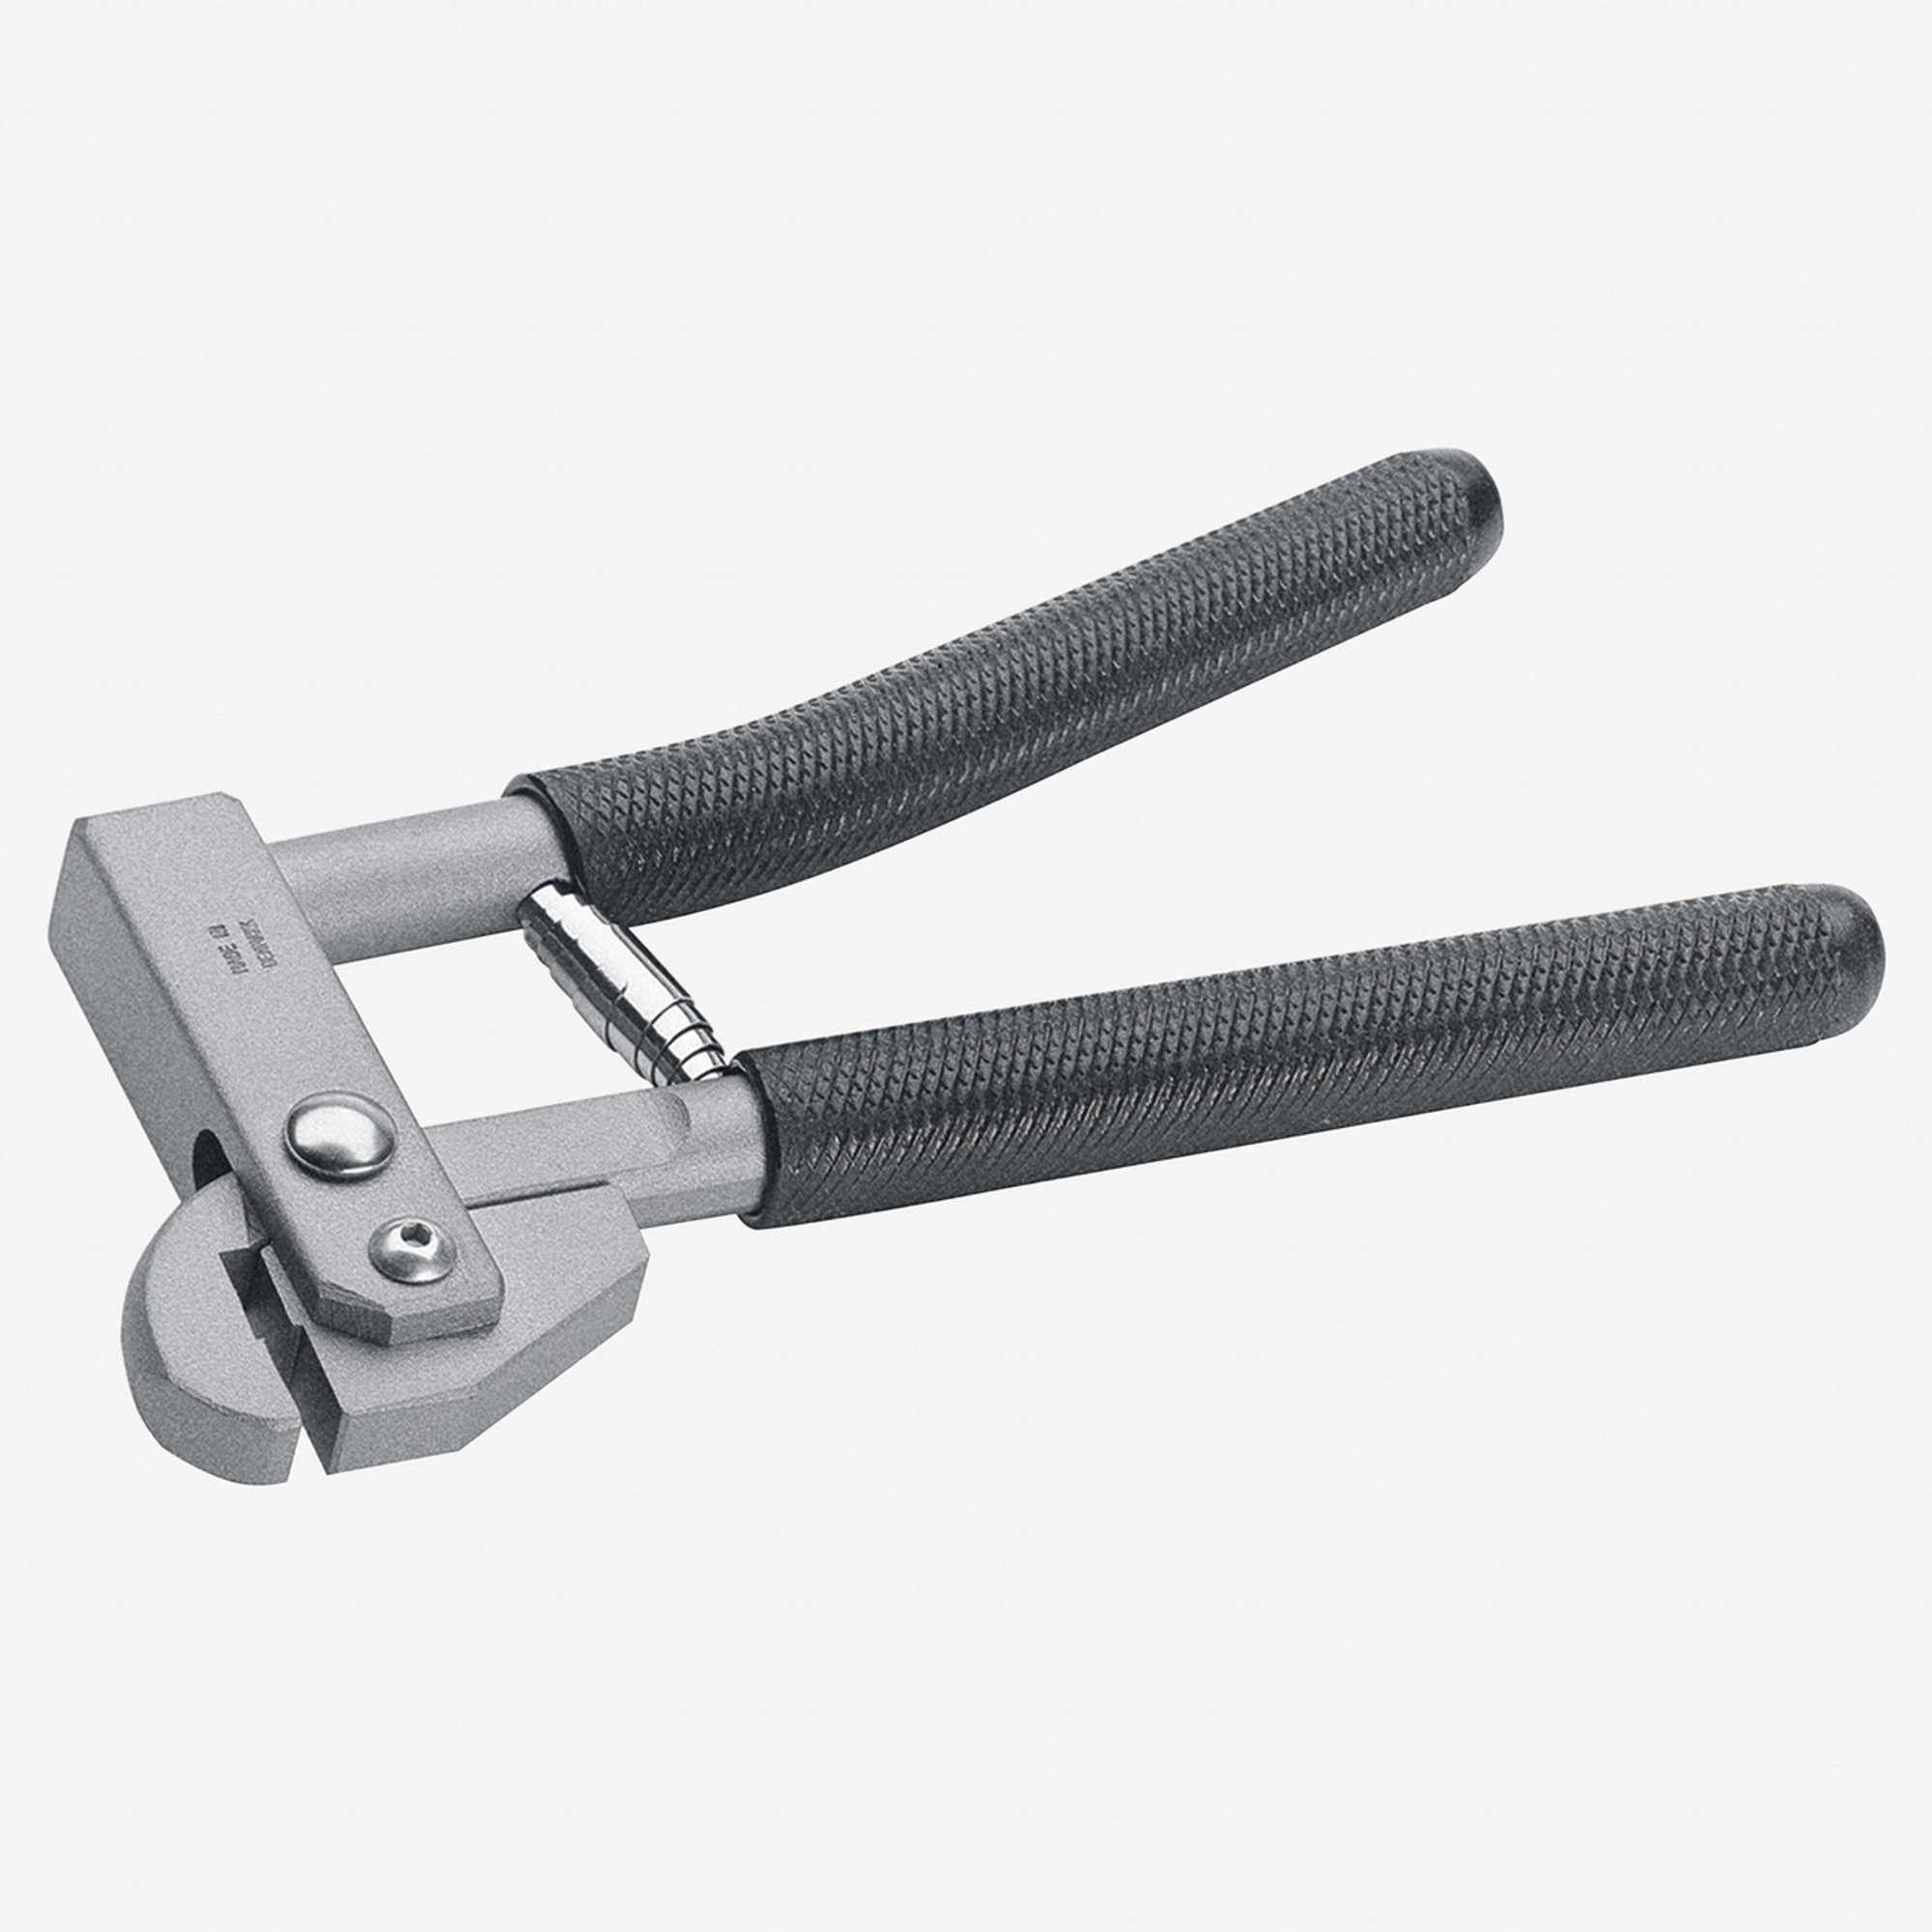 NWS 8.75 Small Pliers for sheet folding